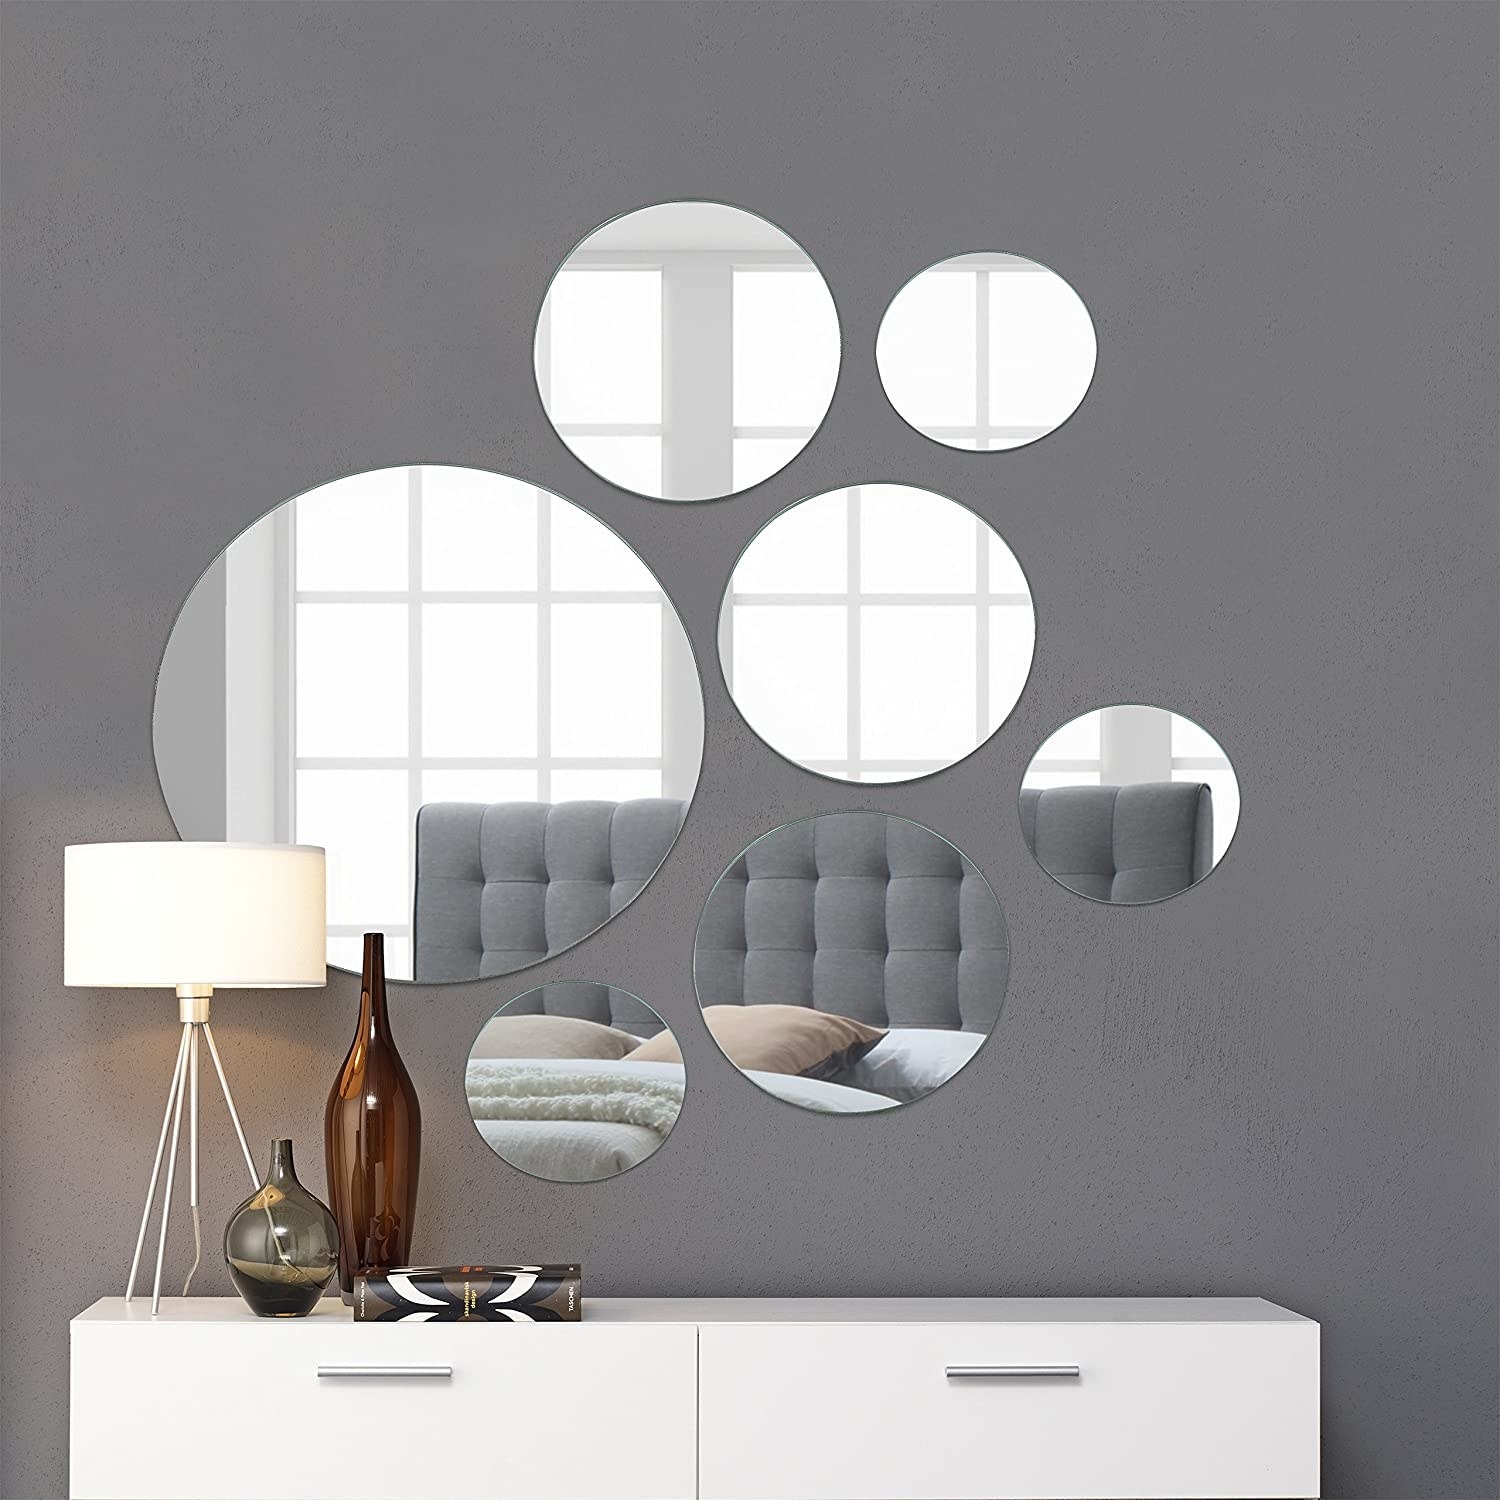 Set of seven big and small circle-shaped mirrors hanging on a green wall above a table